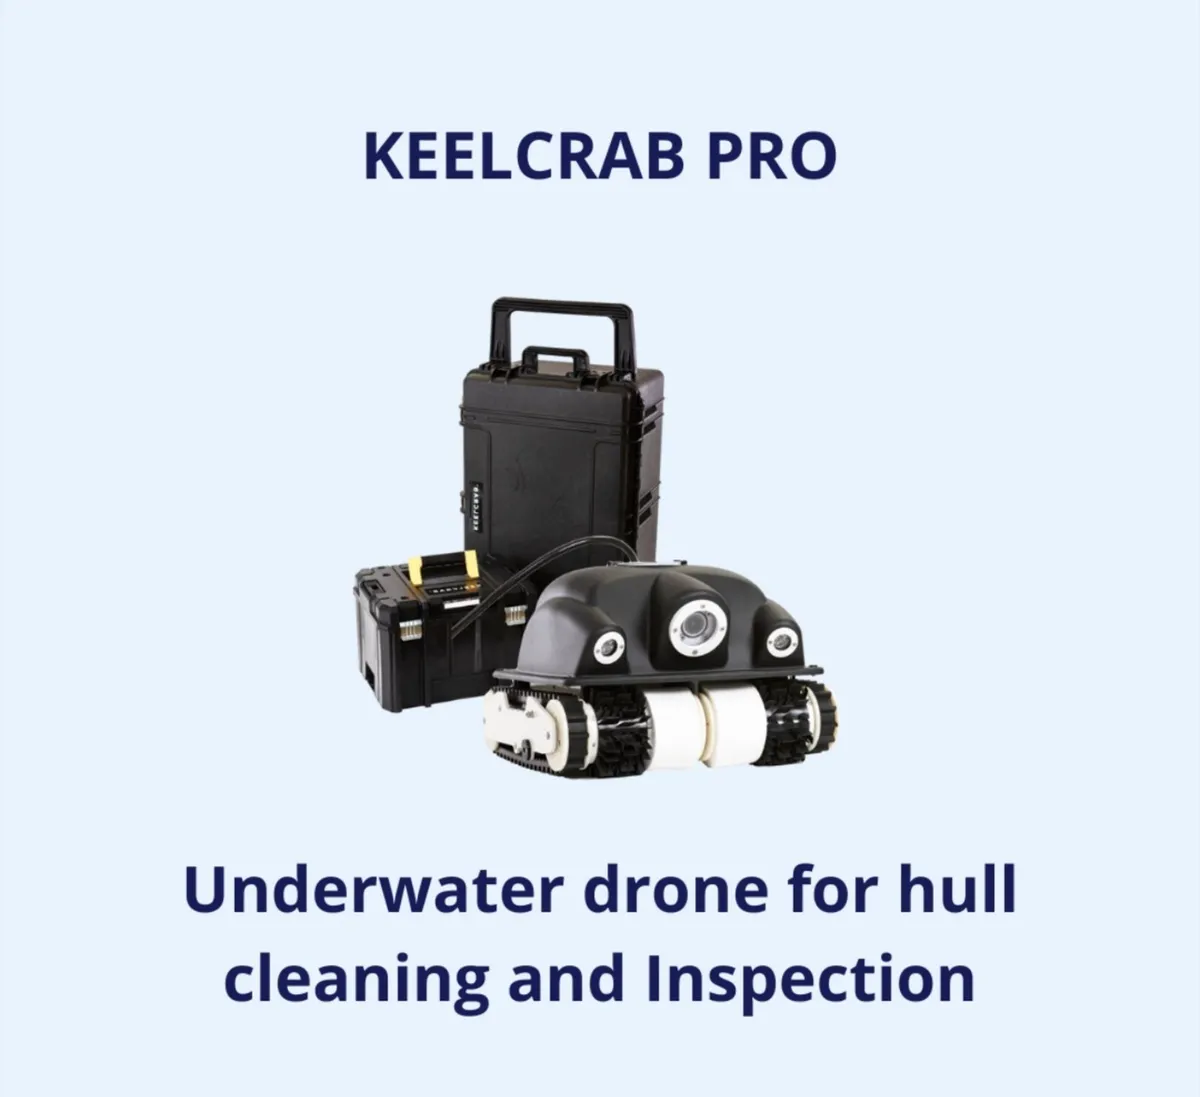 SALE -NEW Keelcrab Pro profesional underwater dron - Image 1